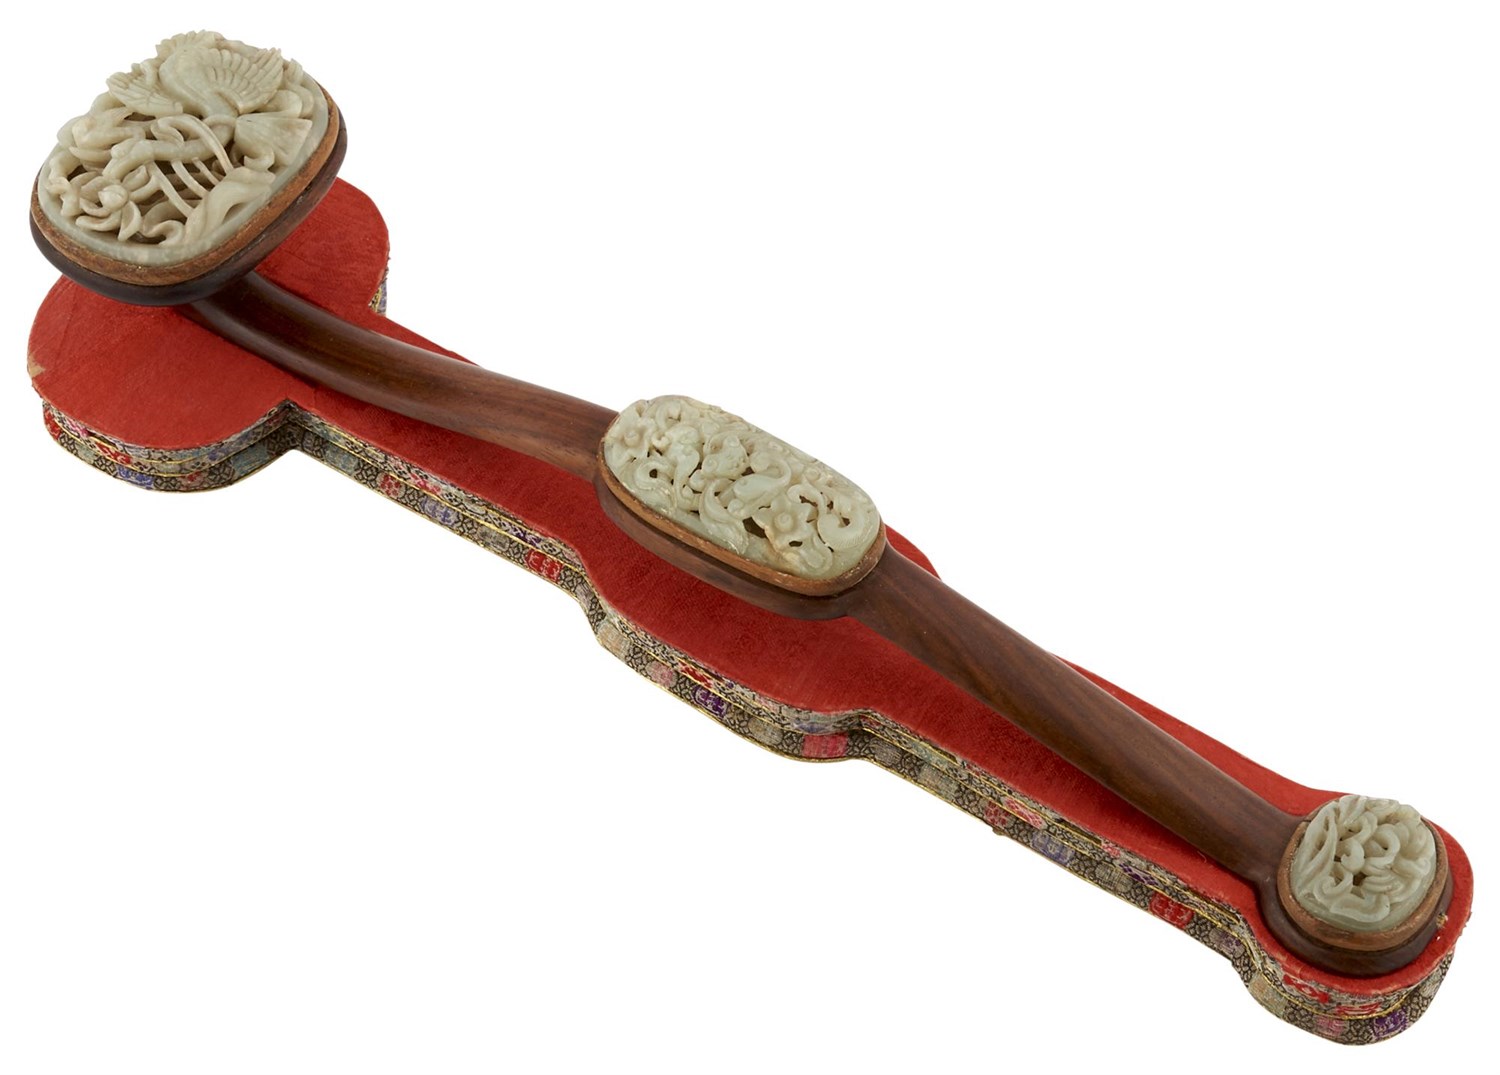 Lot 25 - A Chinese Carved Jade and Hardwood Ruyi Scepter